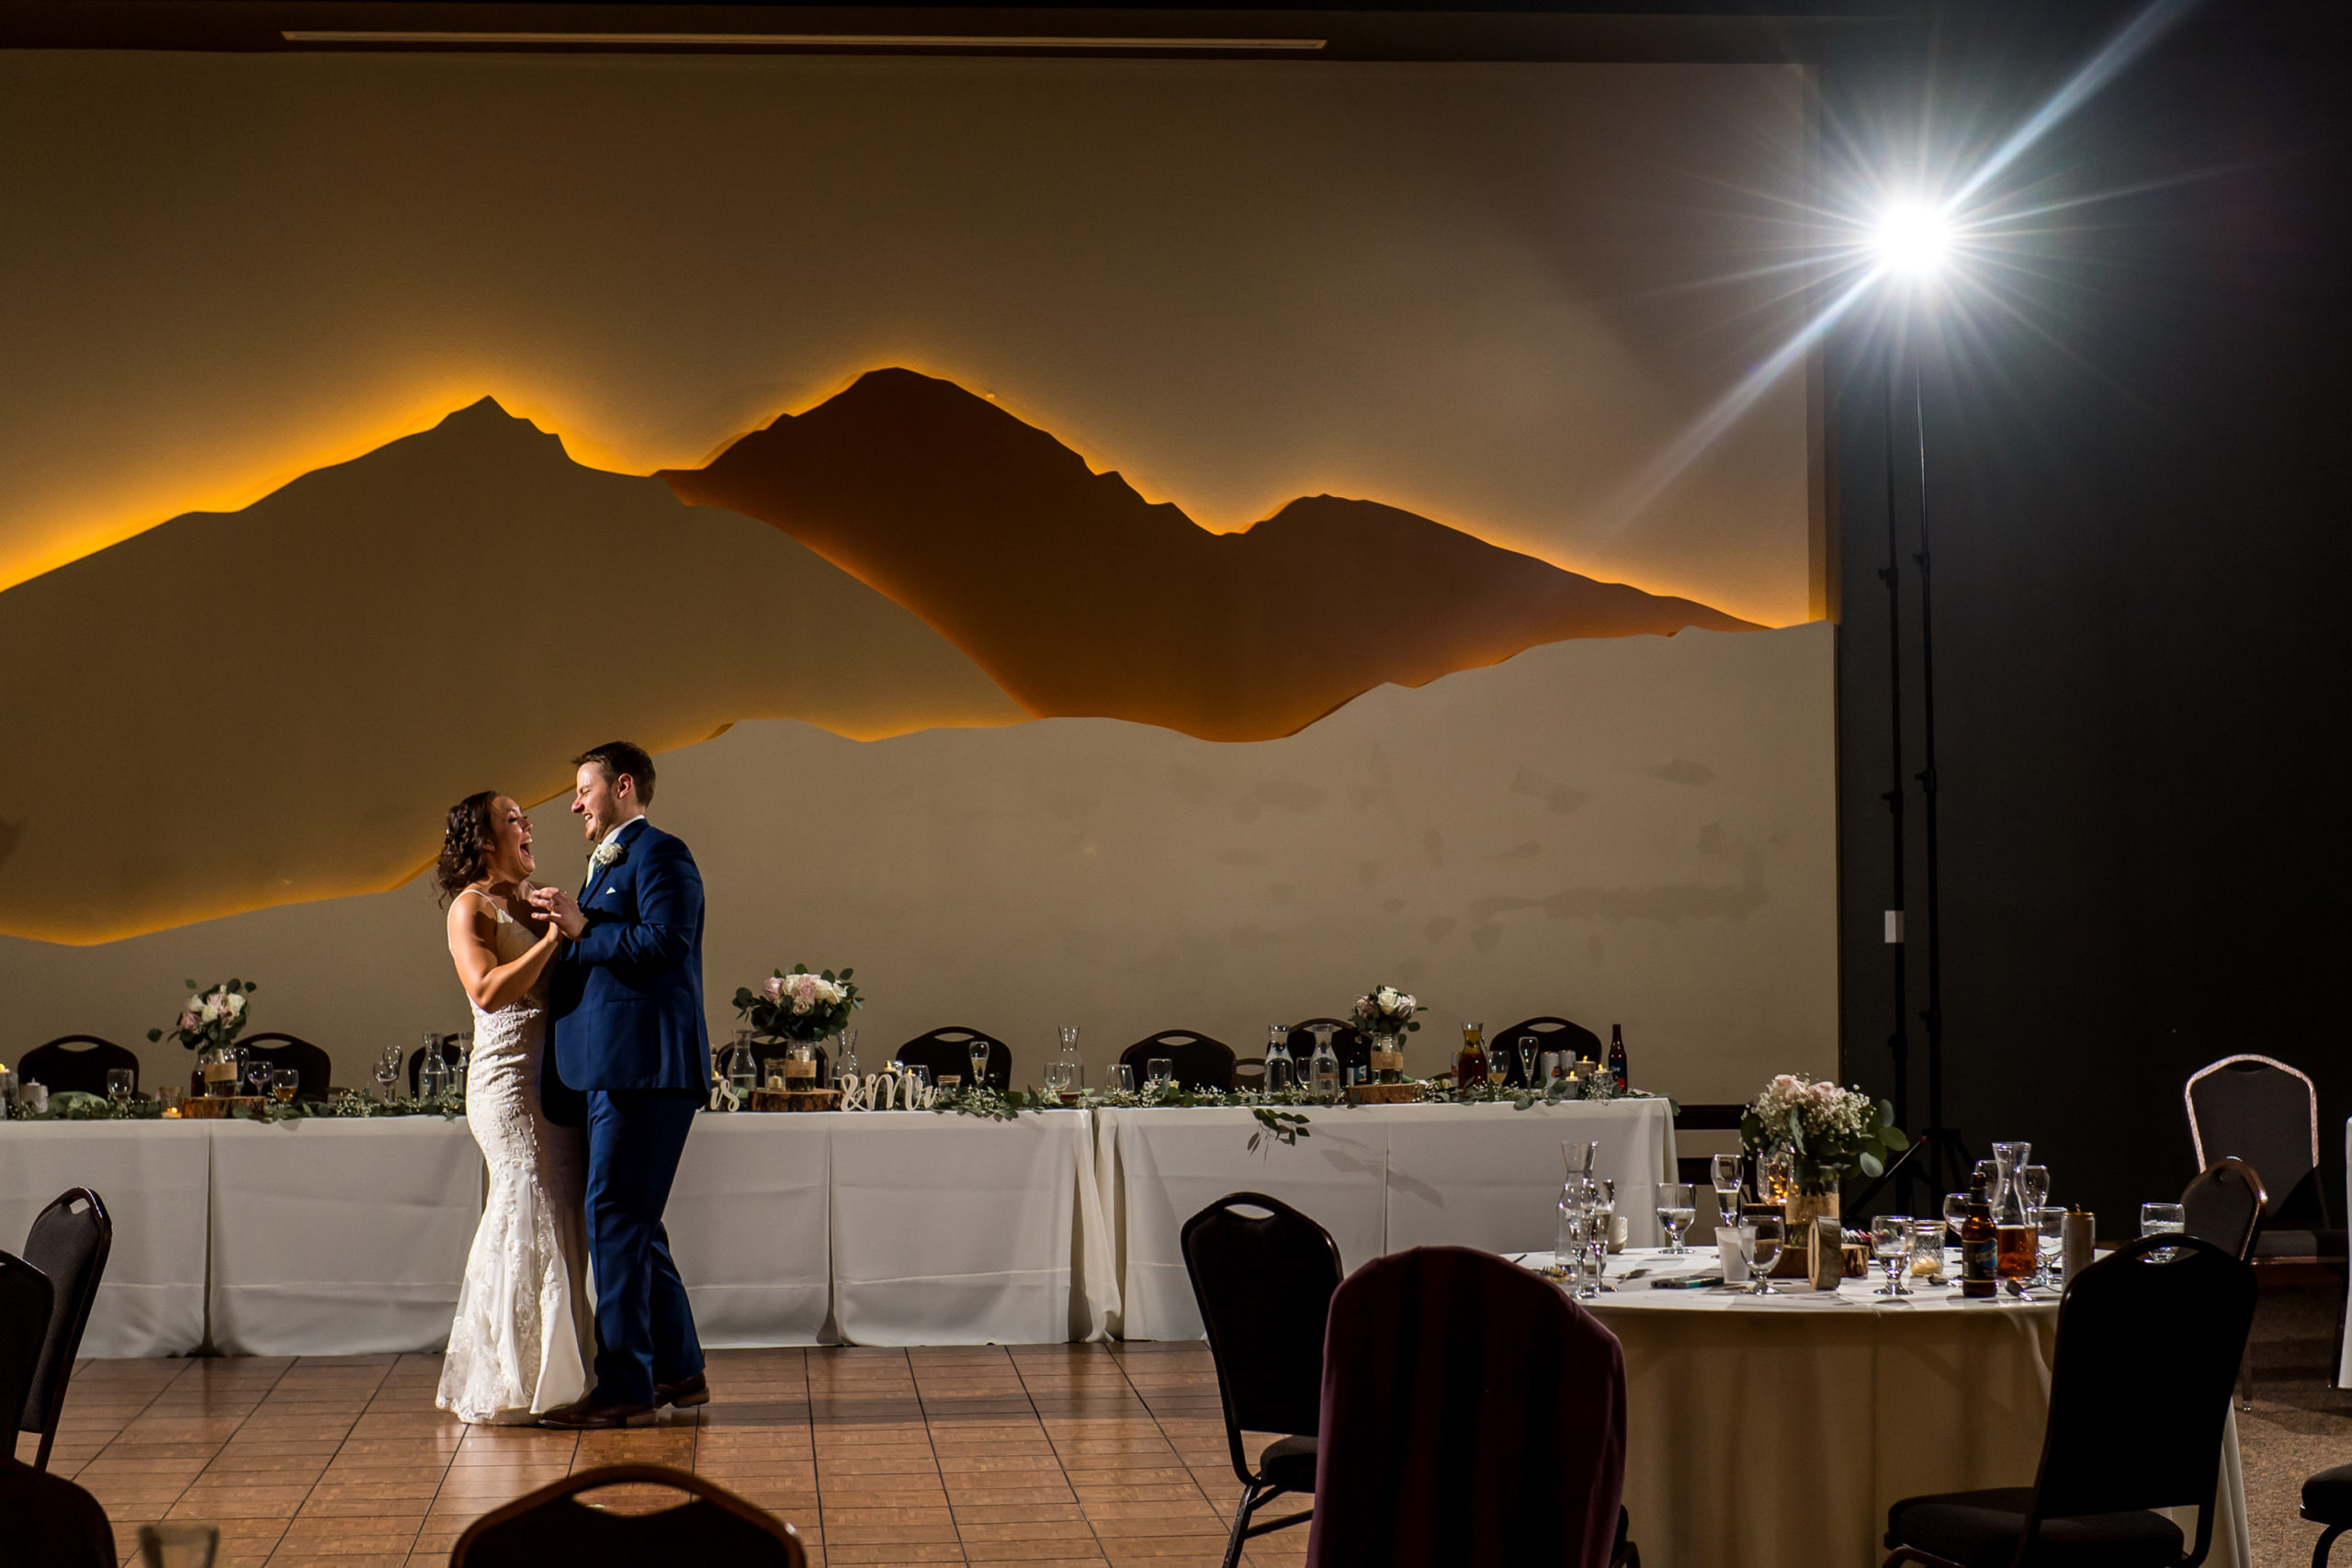 The bride and groom dance during their YMCA of the Rockies wedding in Estes Park, Colorado.